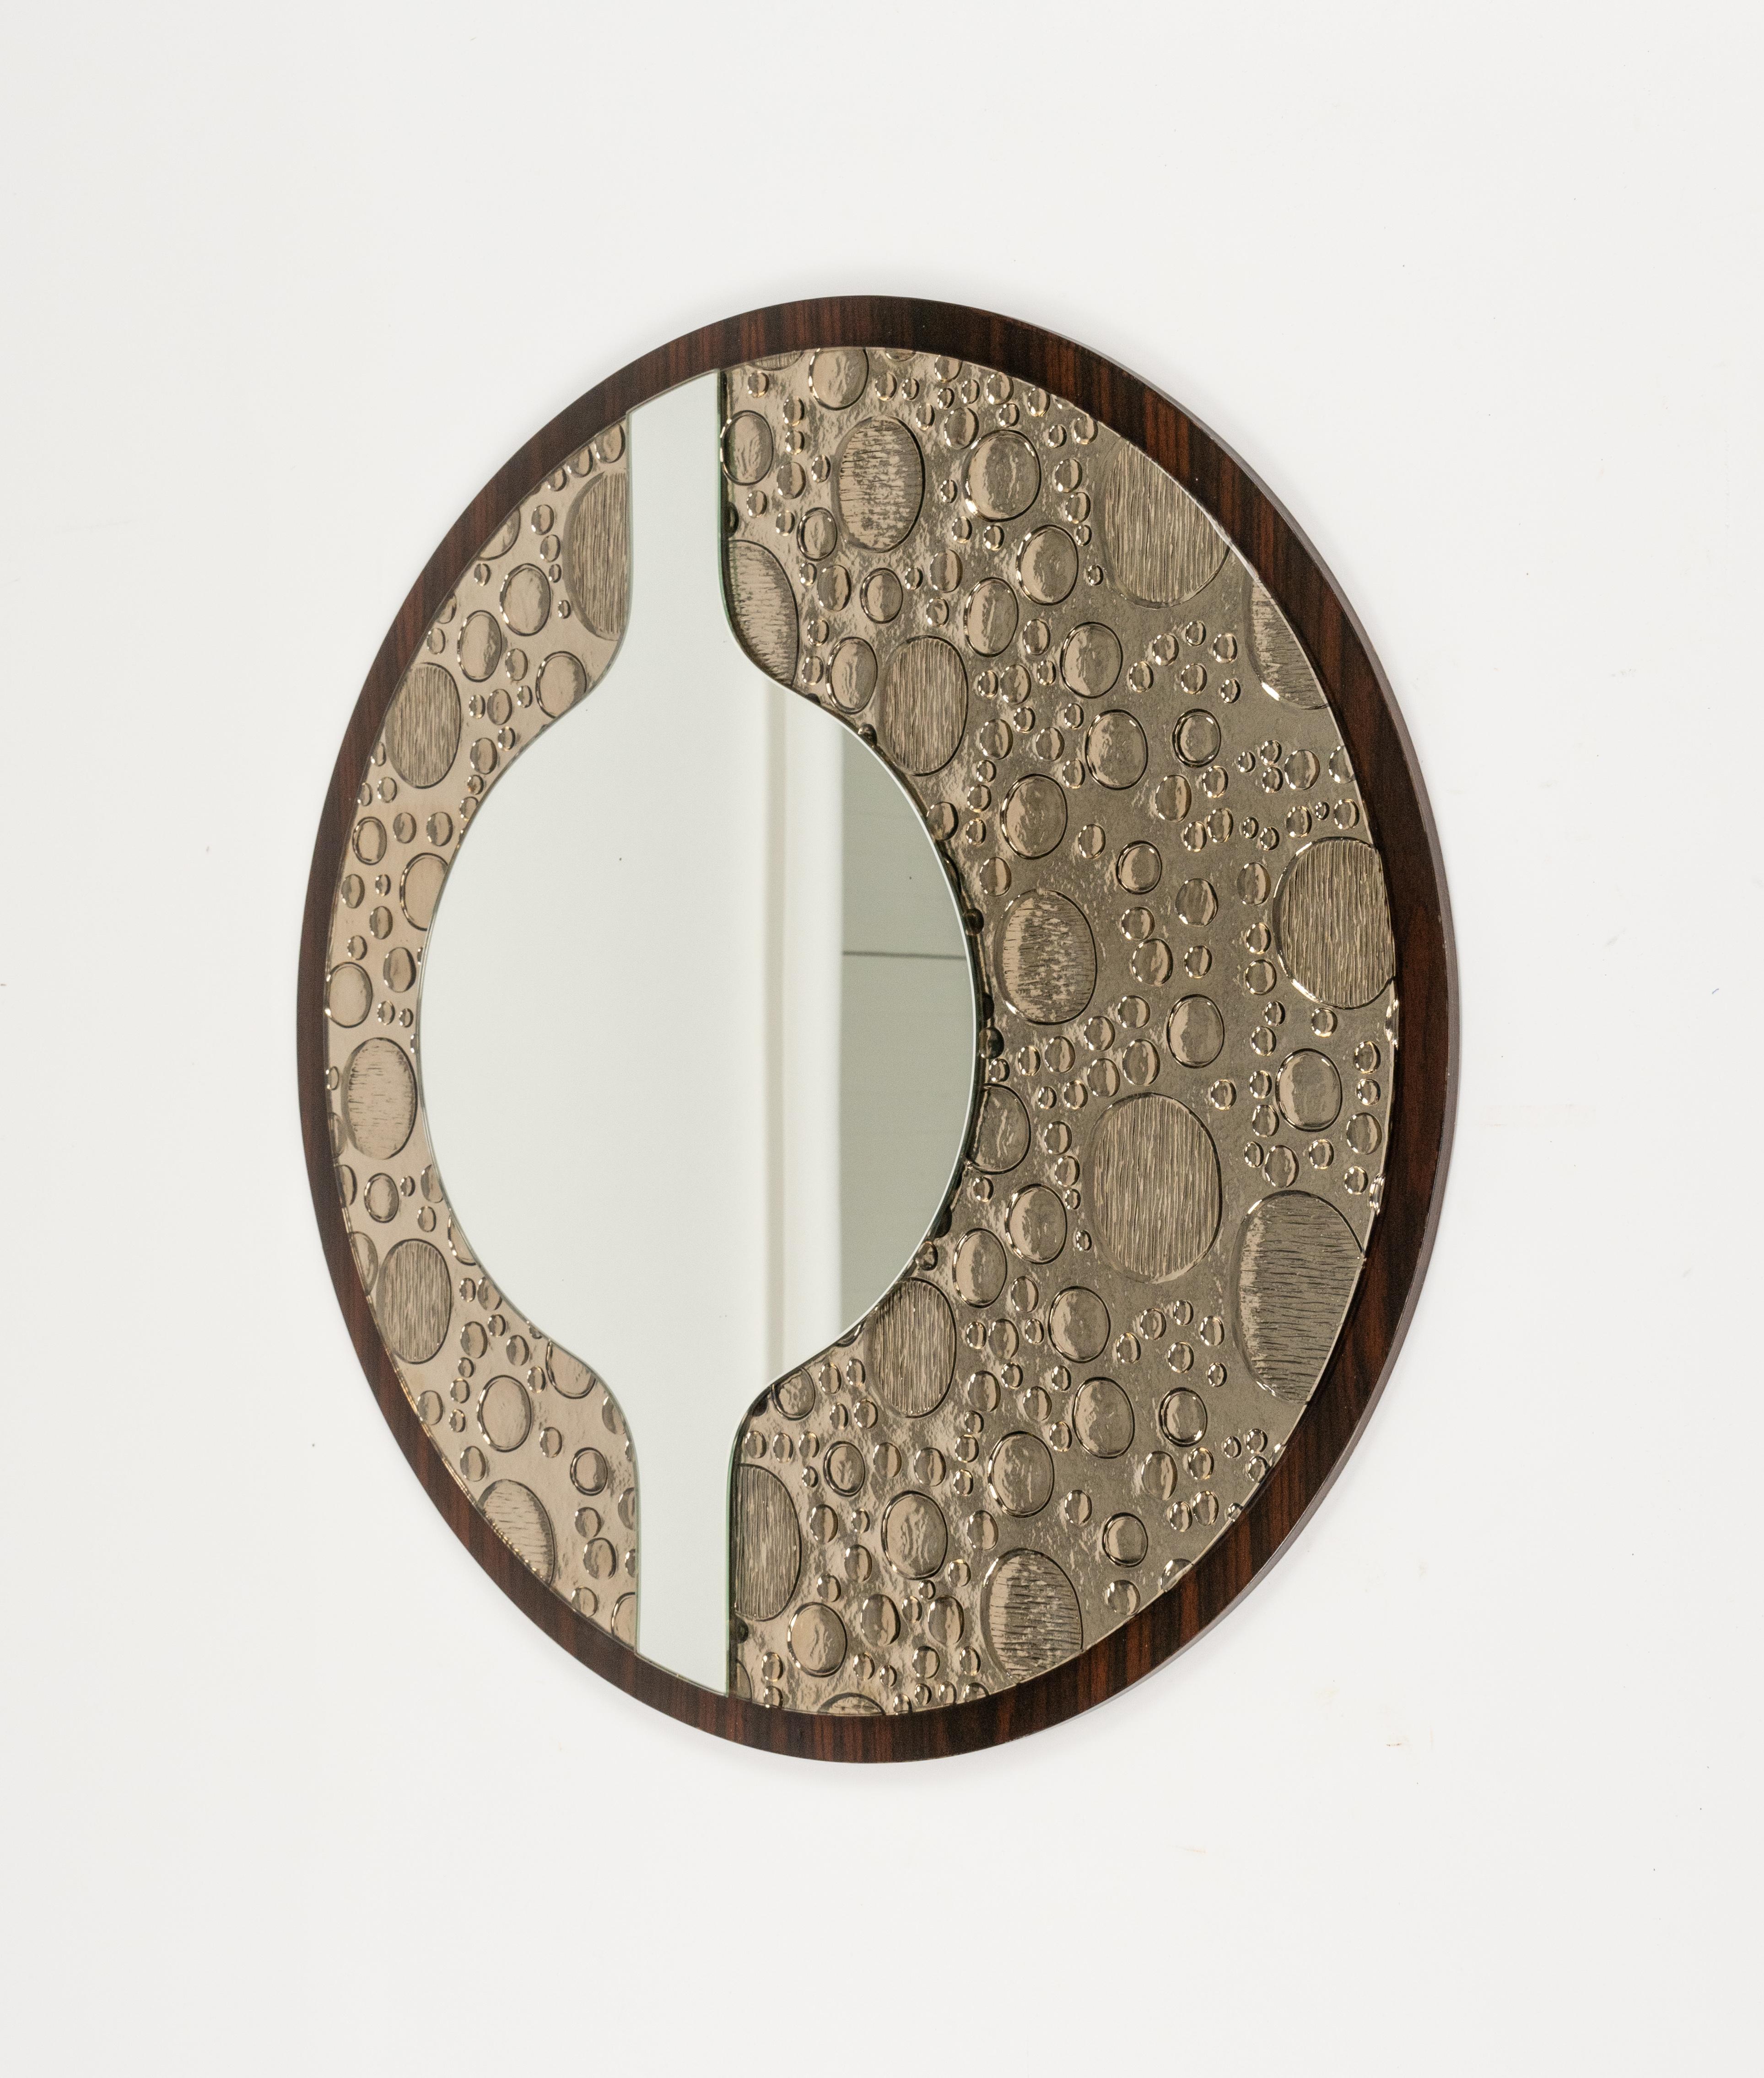 Midcentury Round Wall Mirror in Wood and Glass, Italy 1970s For Sale 1